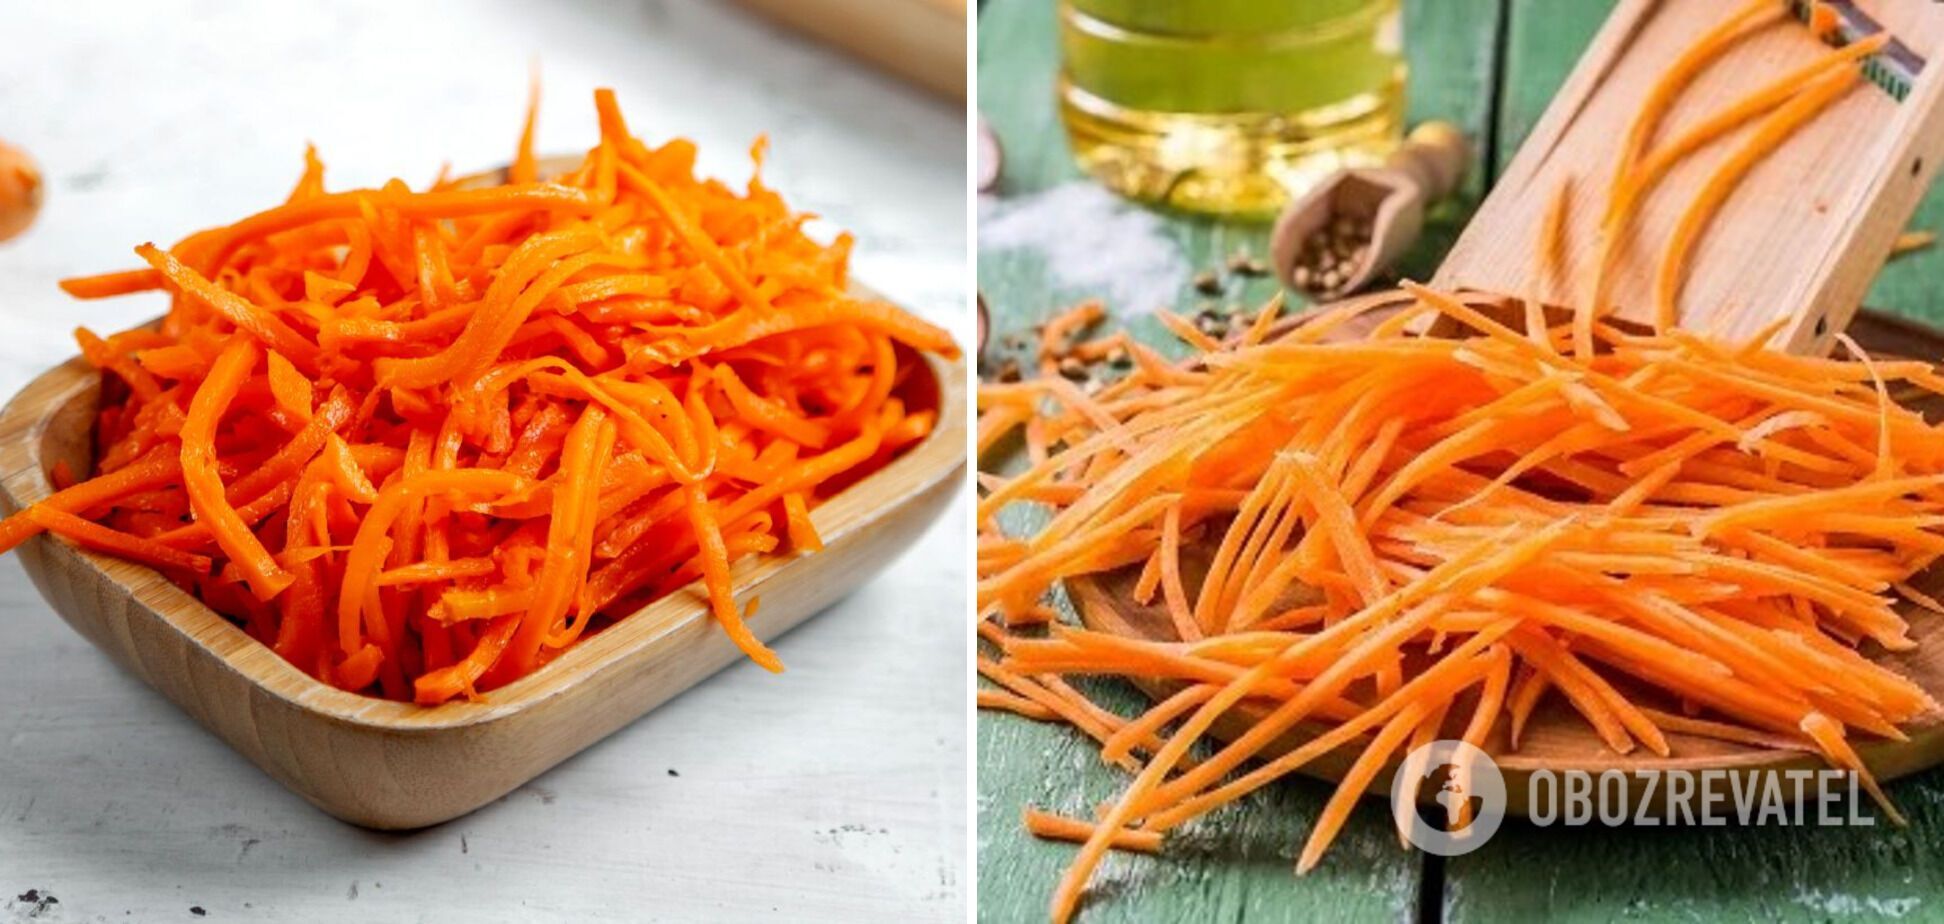 What to cook with carrots